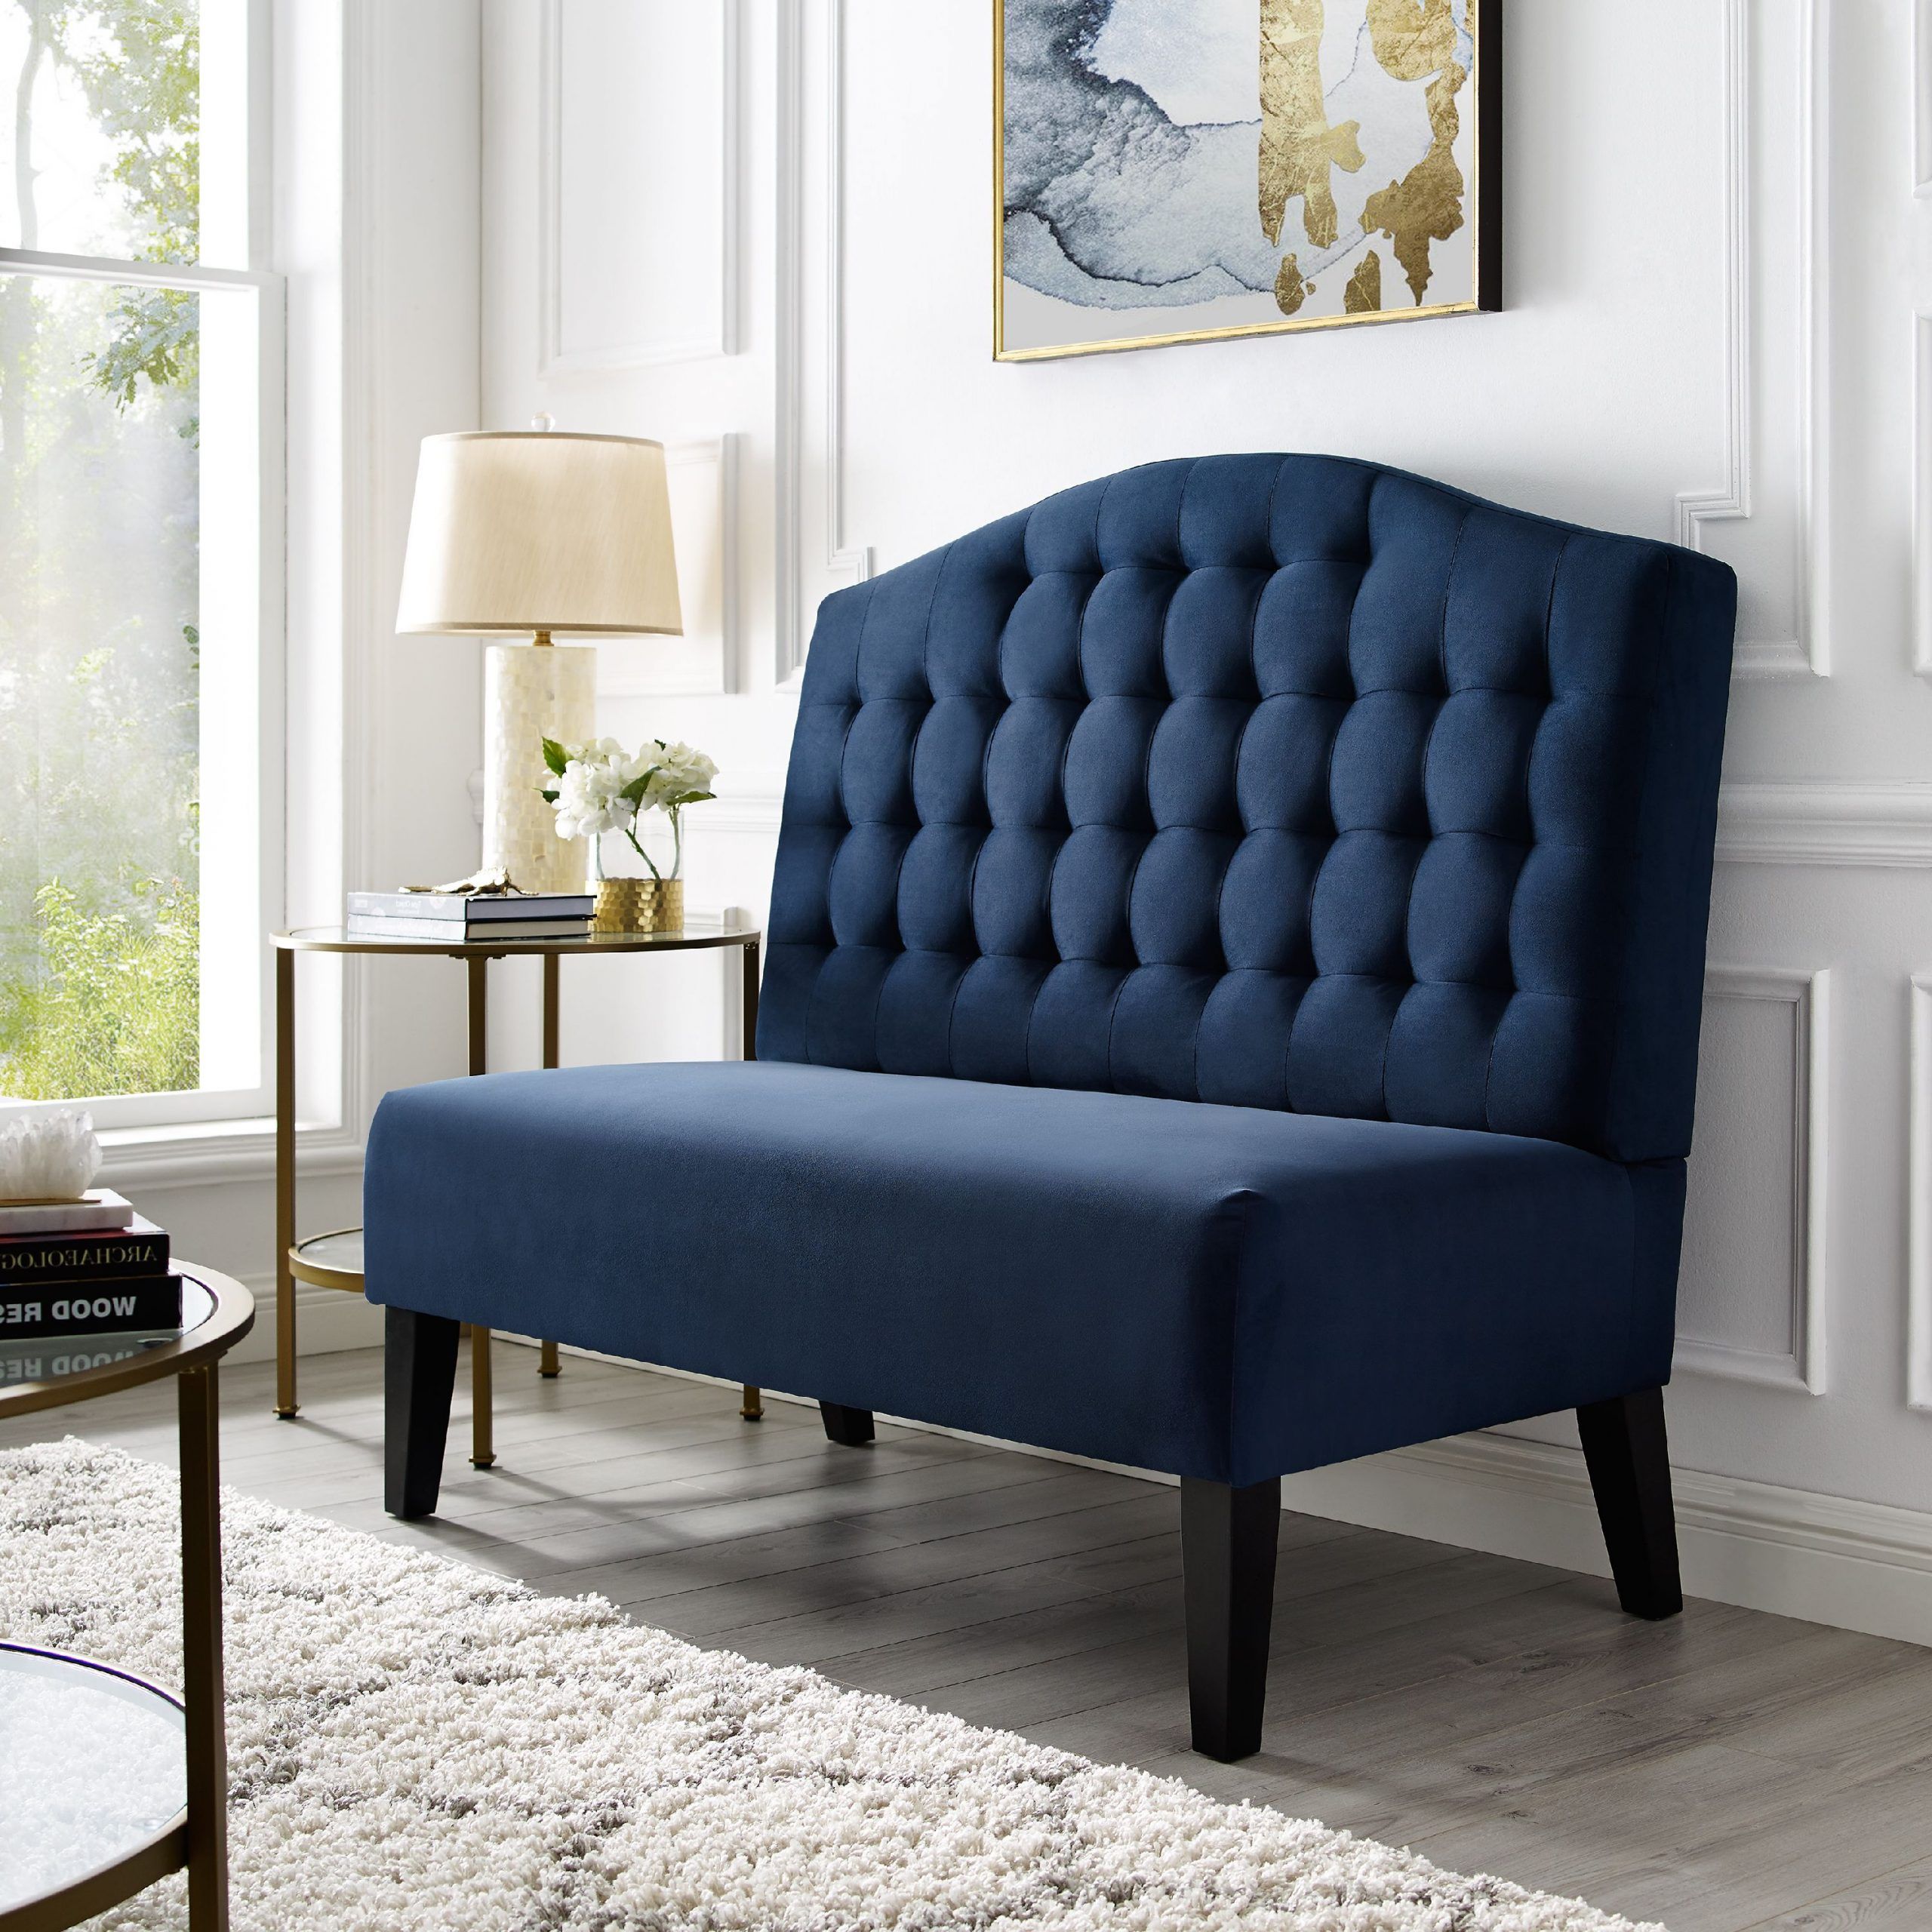 Navy Velvet Fabric Benches Inside Most Current Biscuit Tufted Entryway Bench In Navy Blue Velvet – Walmart (View 8 of 10)